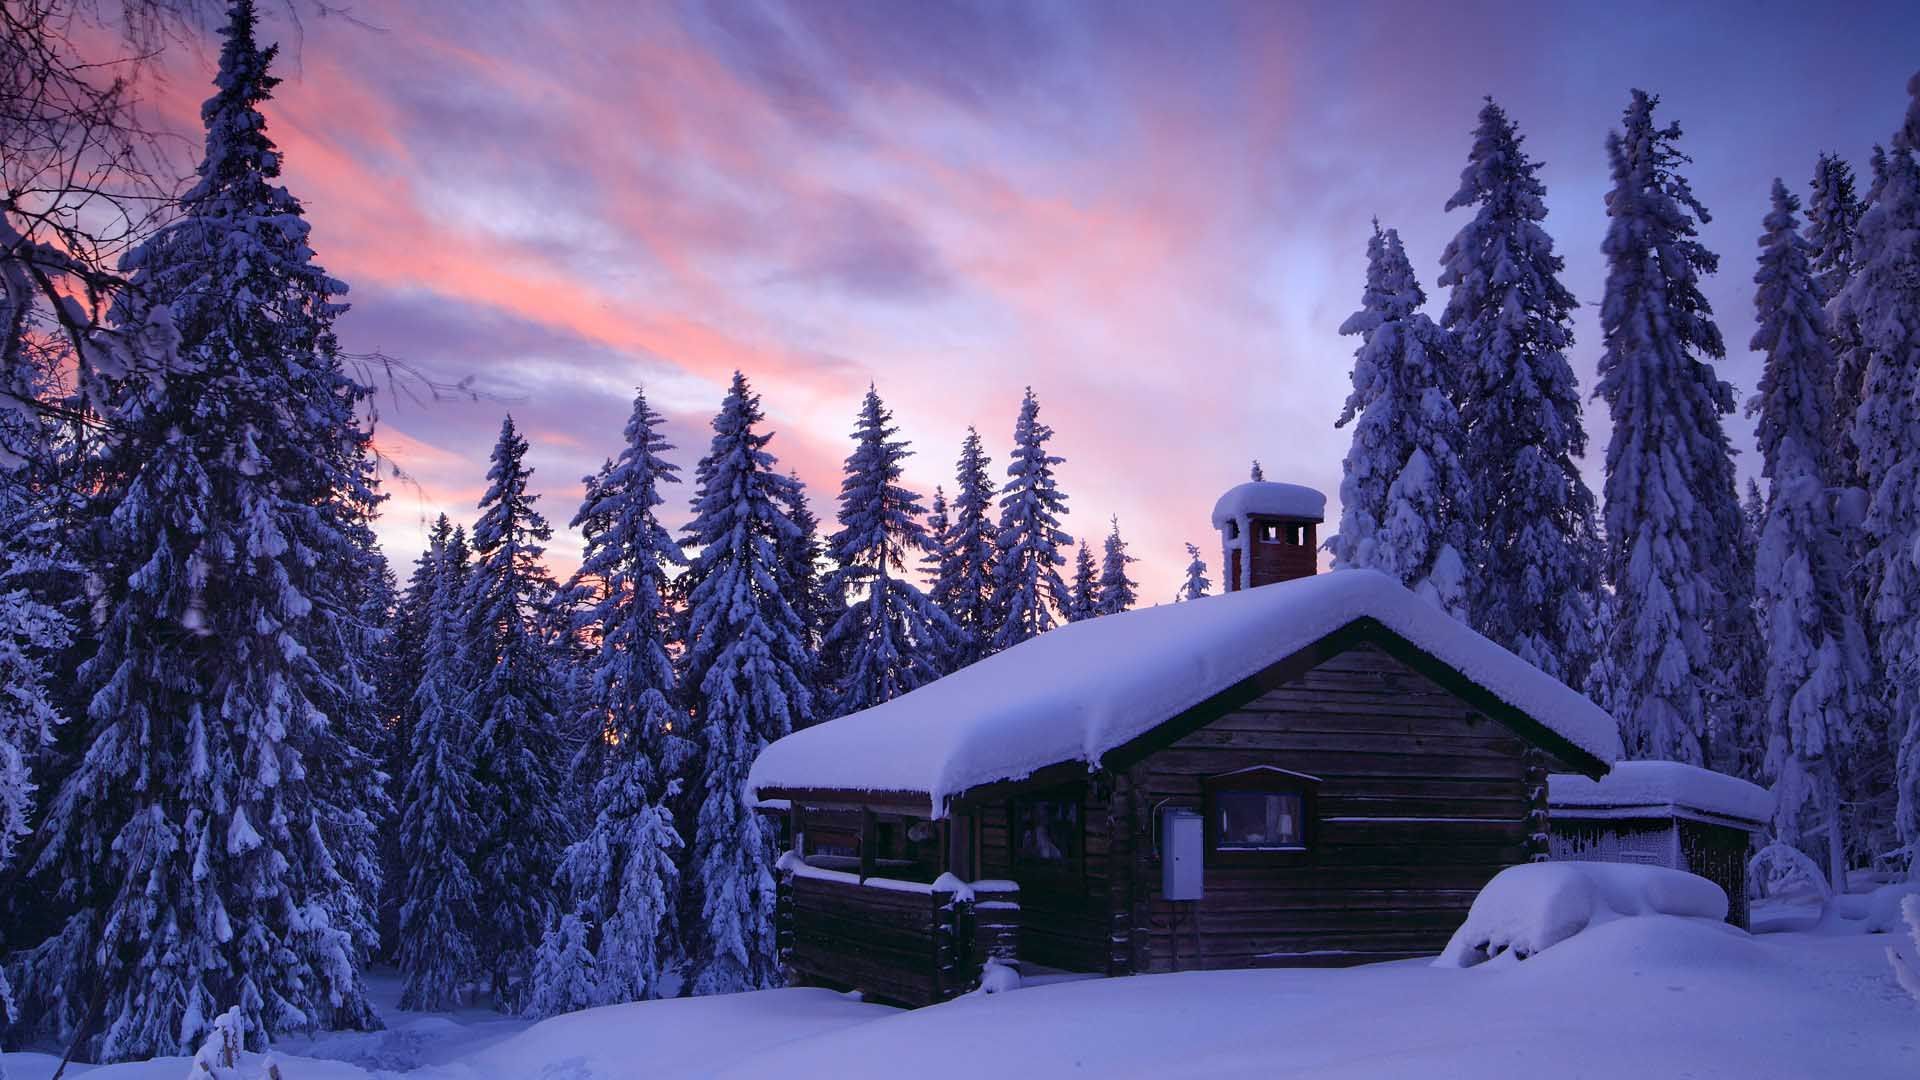 Winter Scene download free wallpapers for pc in hd